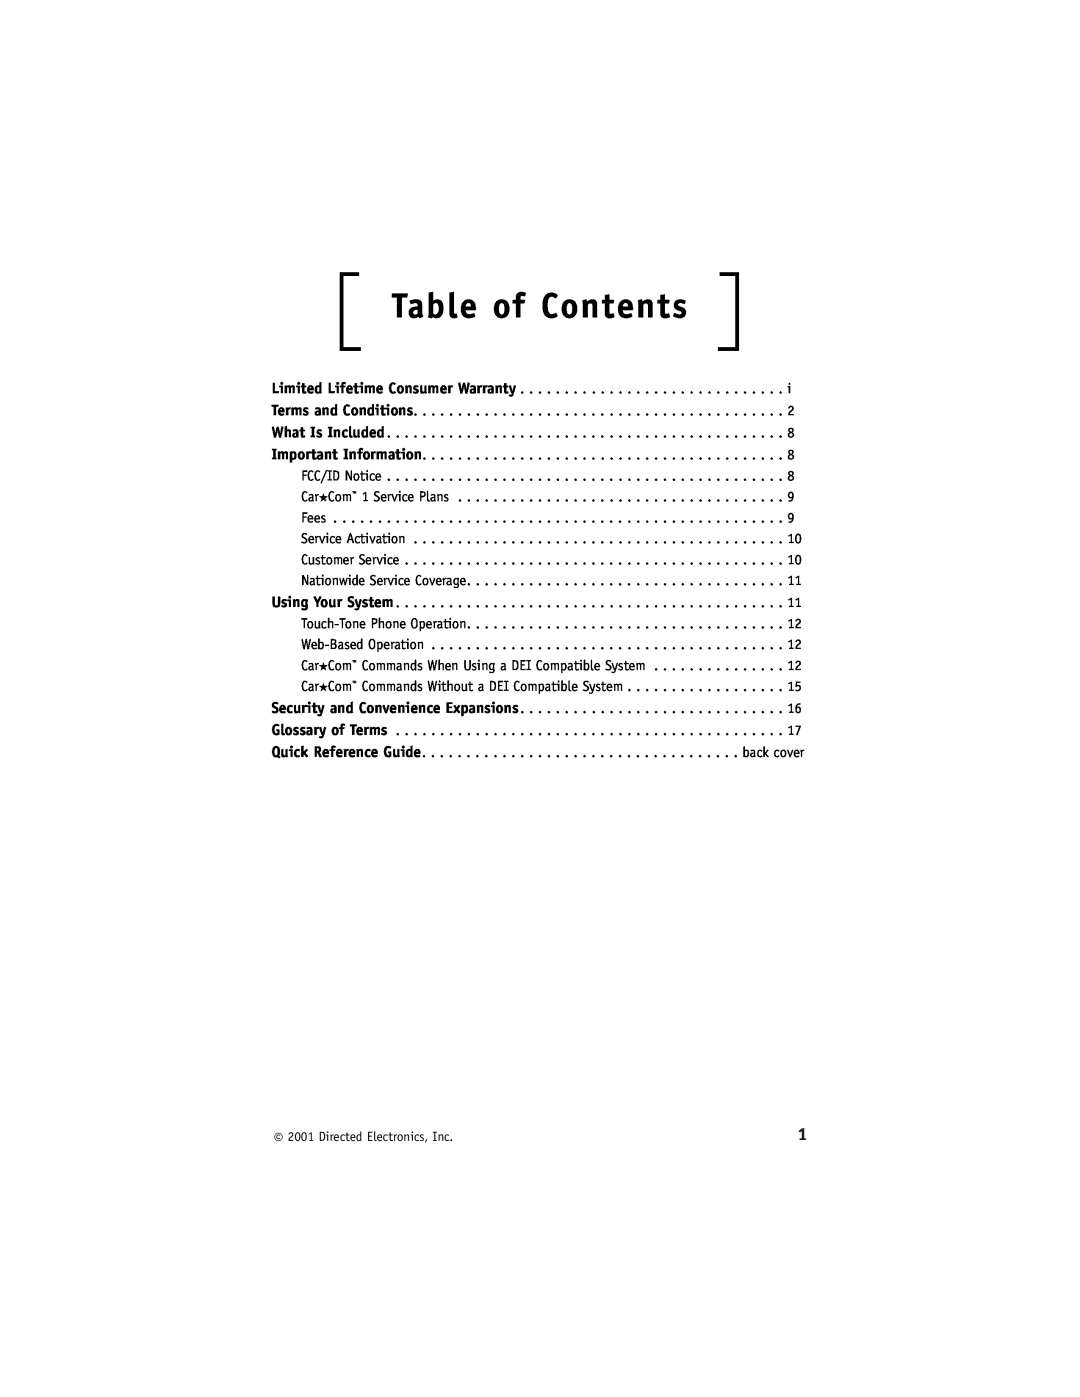 Directed Electronics Model 400 manual Table of Contents 